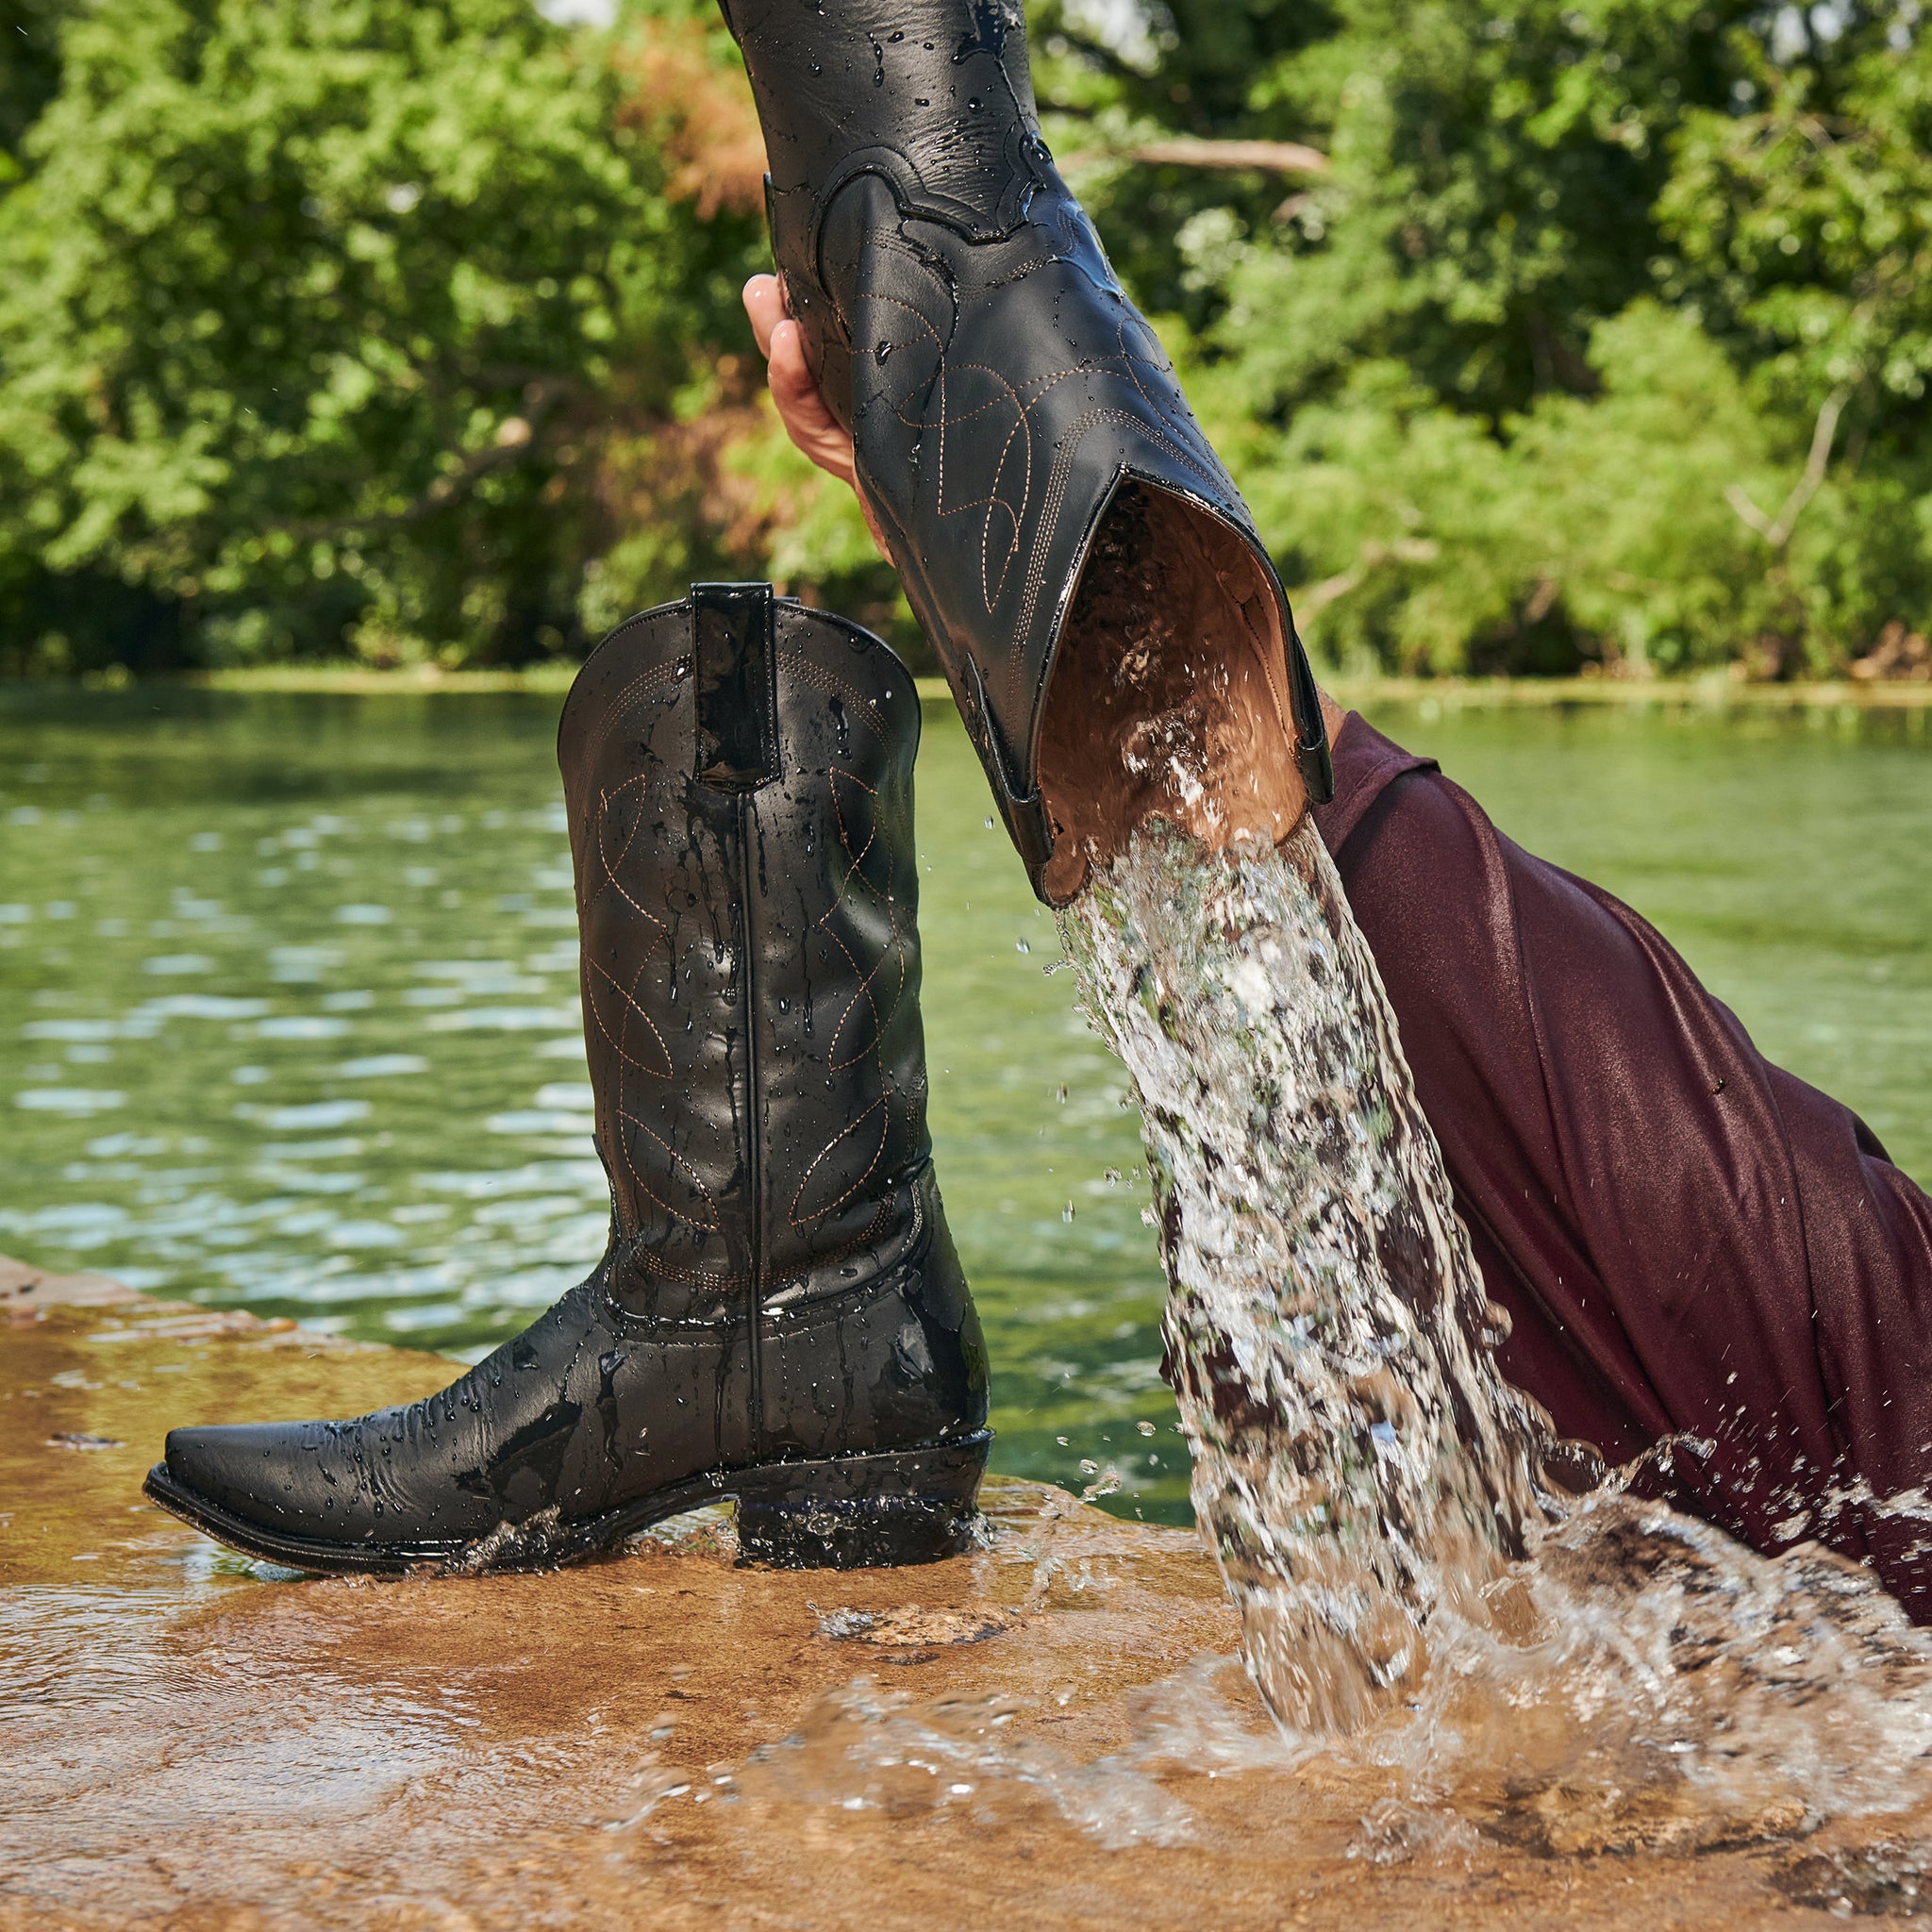 Wet N' Wild: Can You Get Your Boots Wet?